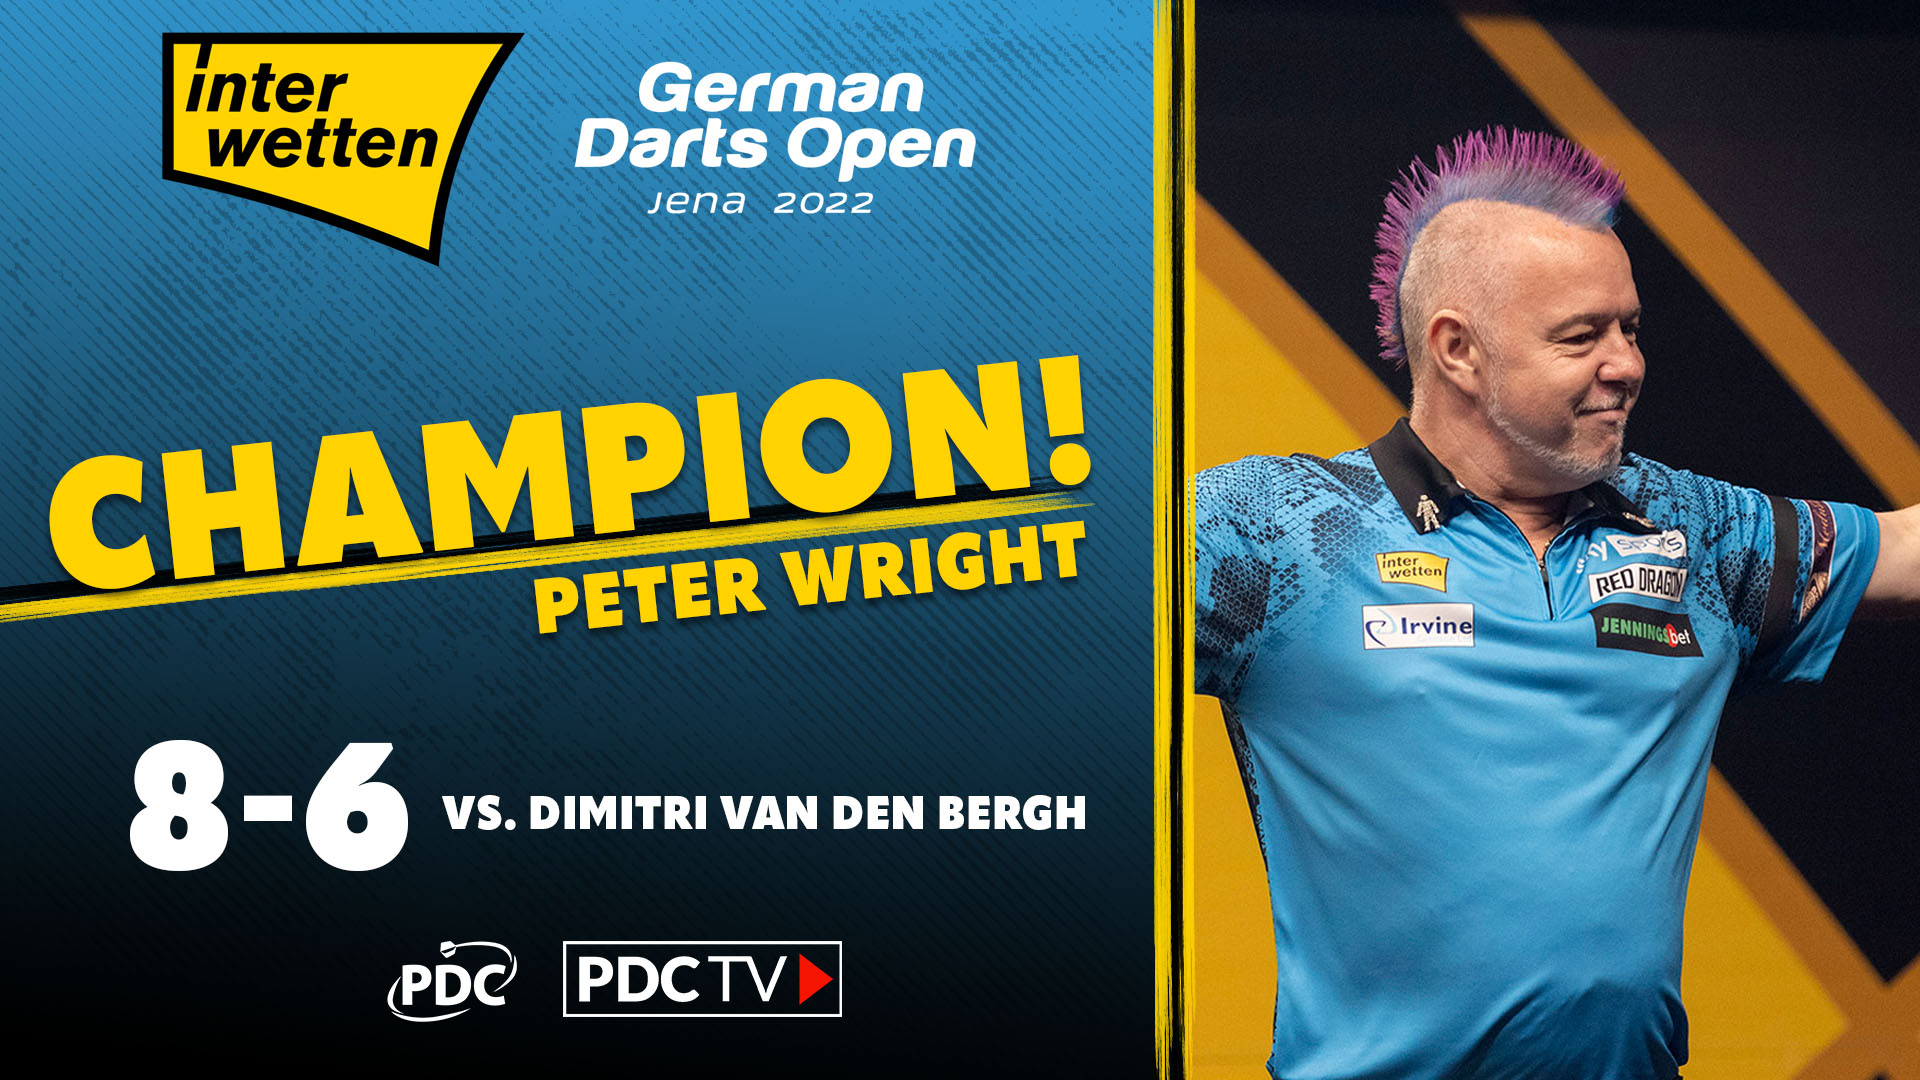 PDC Darts on Twitter: "WRIGHT WINS! 🏆 Peter Wright is the 2022 German Darts Open champion! The World Champion denies Dimitri Van den Bergh in a thrilling final to clinch his